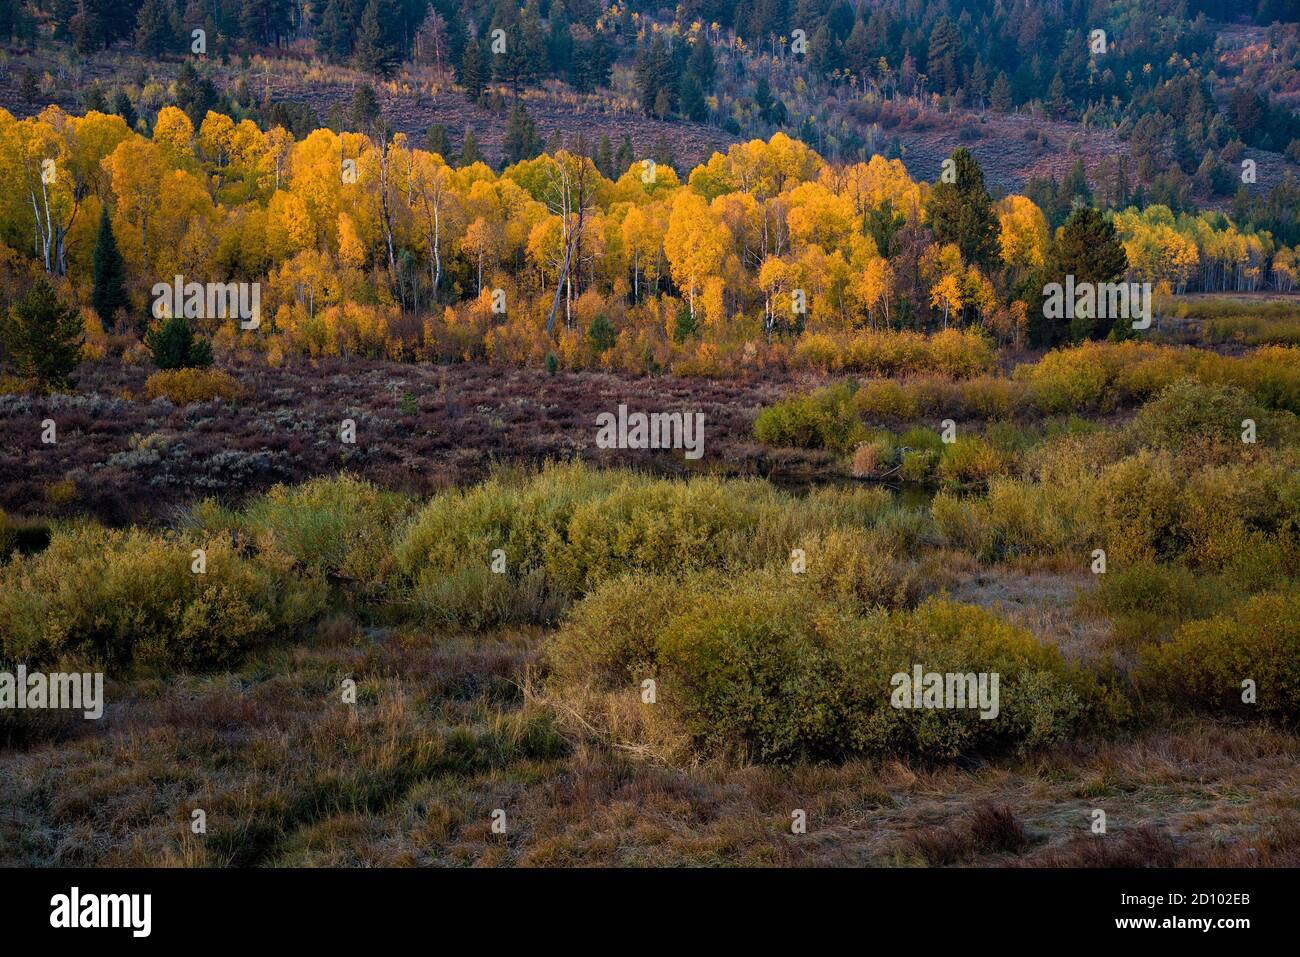 Golden Quaking Aspen, mountain meadows, and small stream.  Autumn delights our visual senses and conjure up feelings of nostalgia, and tranquility. Stock Photo